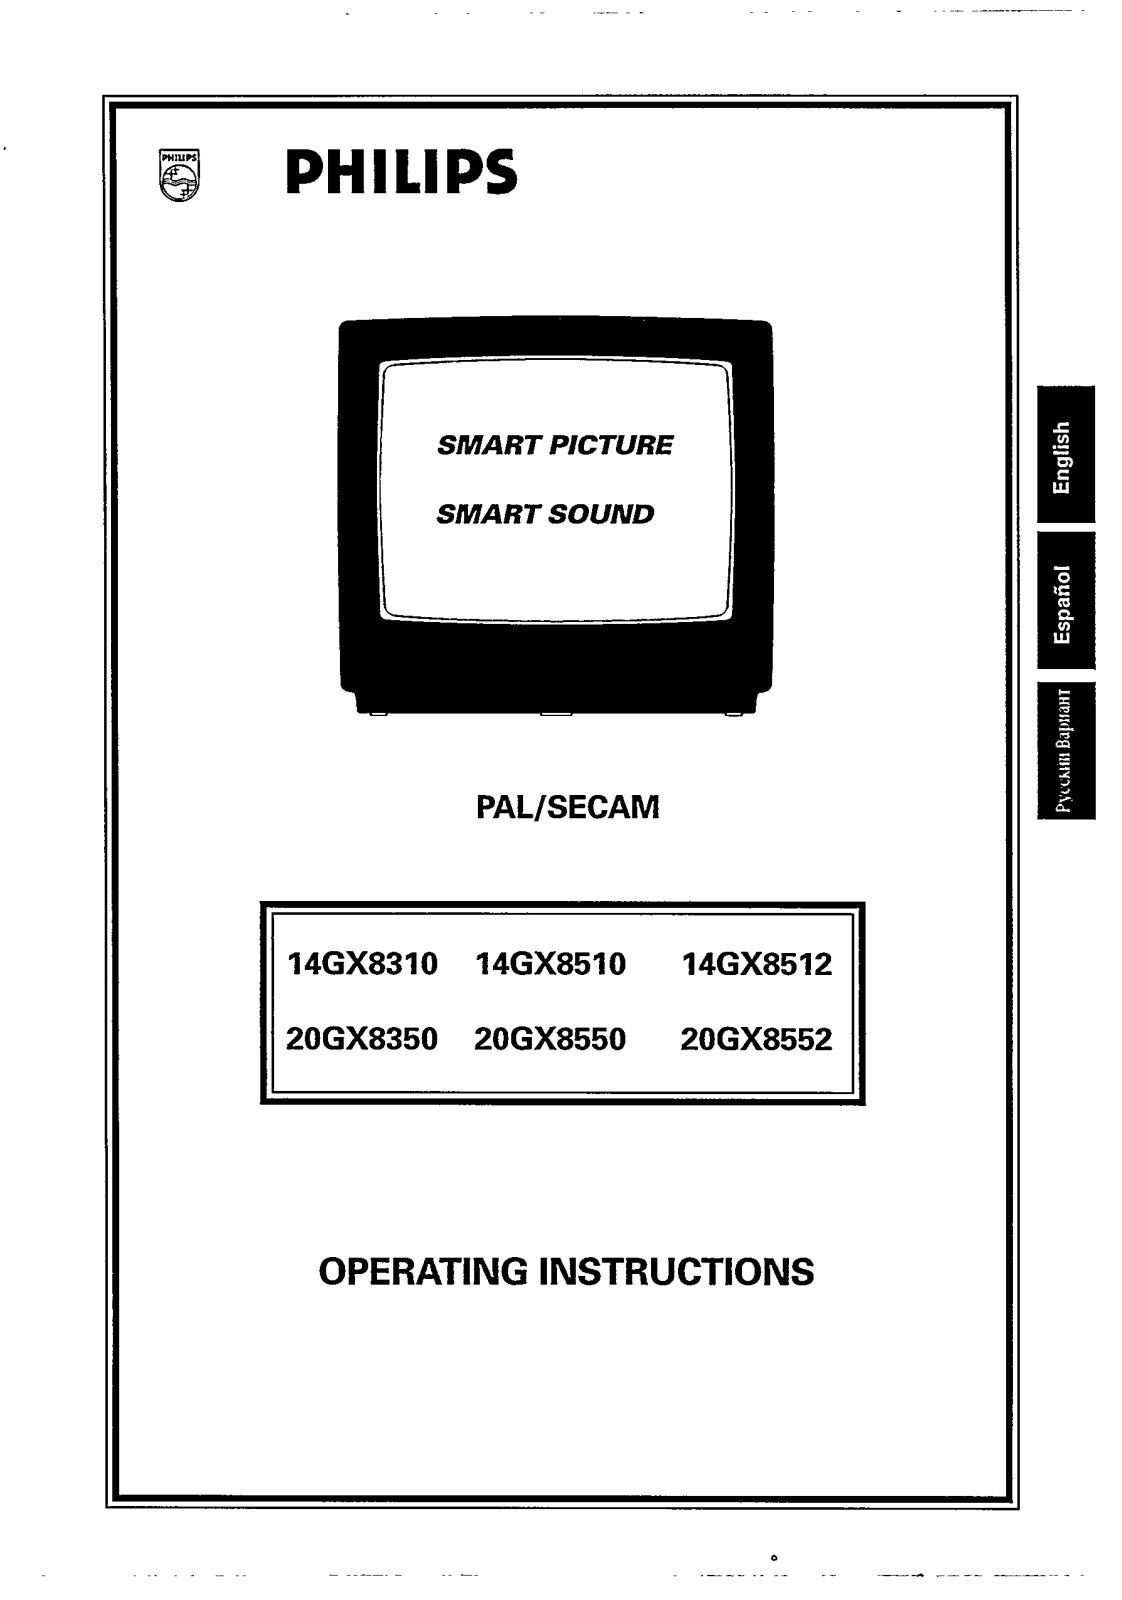 Philips 20gx8350 Operating instructions